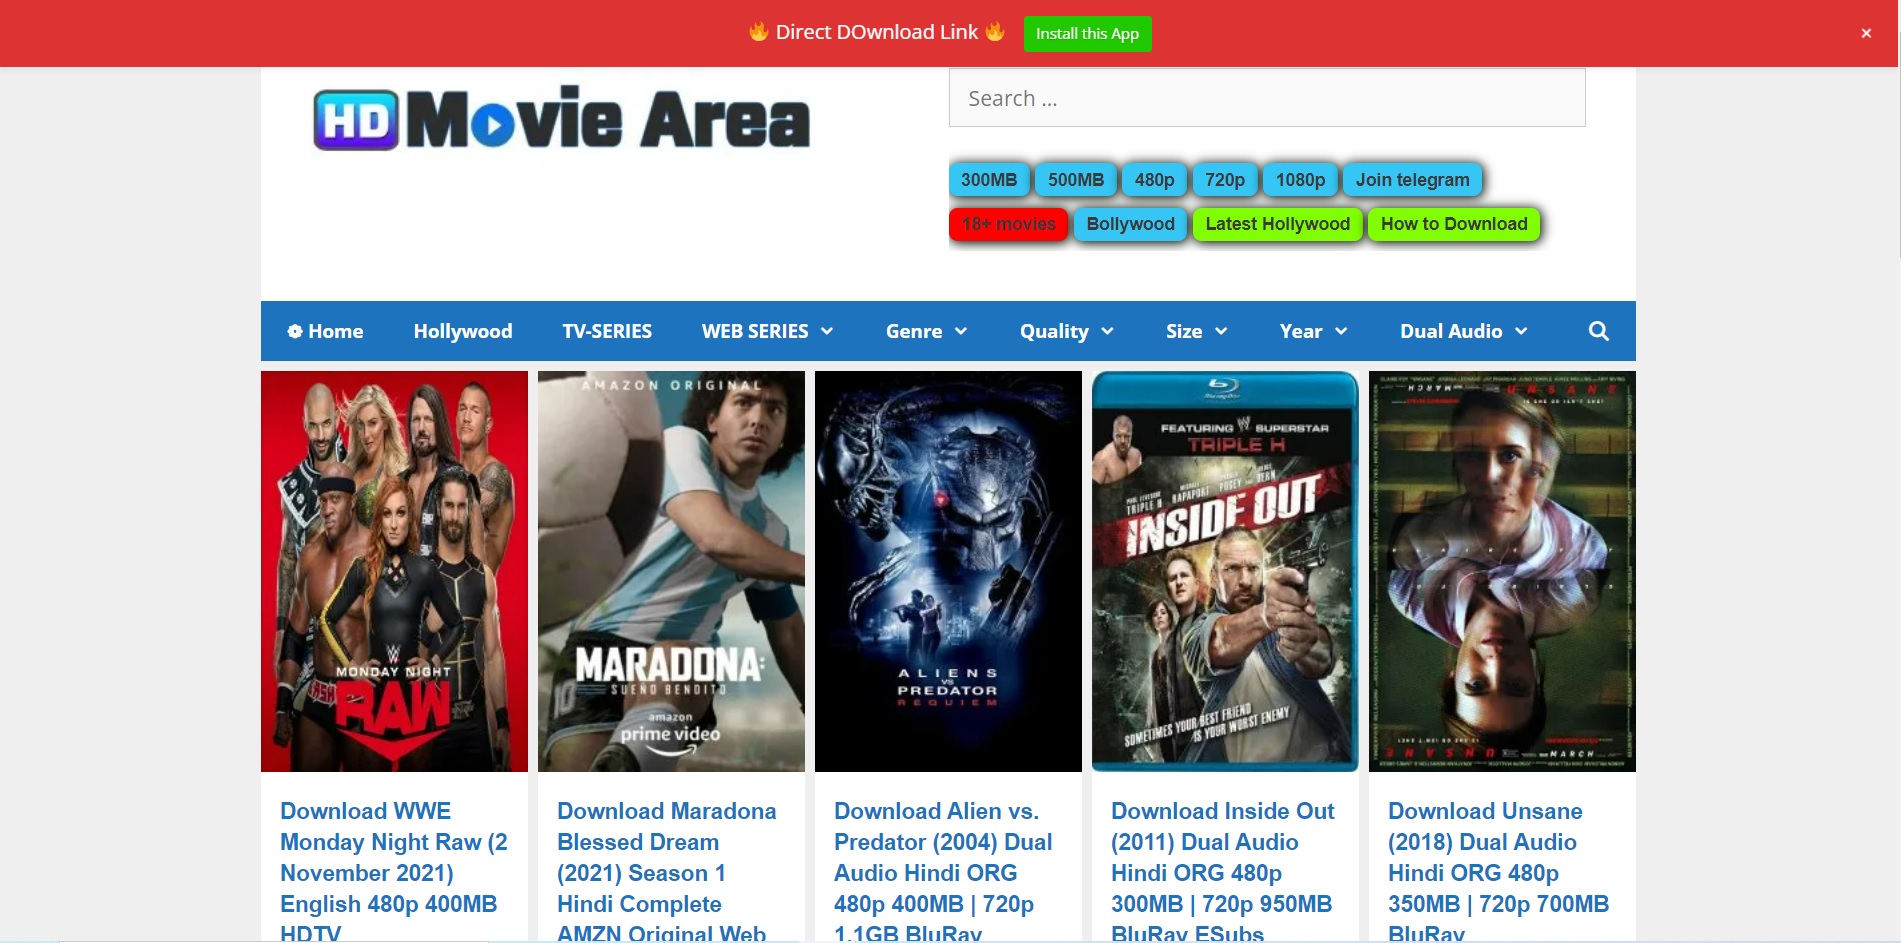 HDMovieArea website with Hollywood movies suggestions